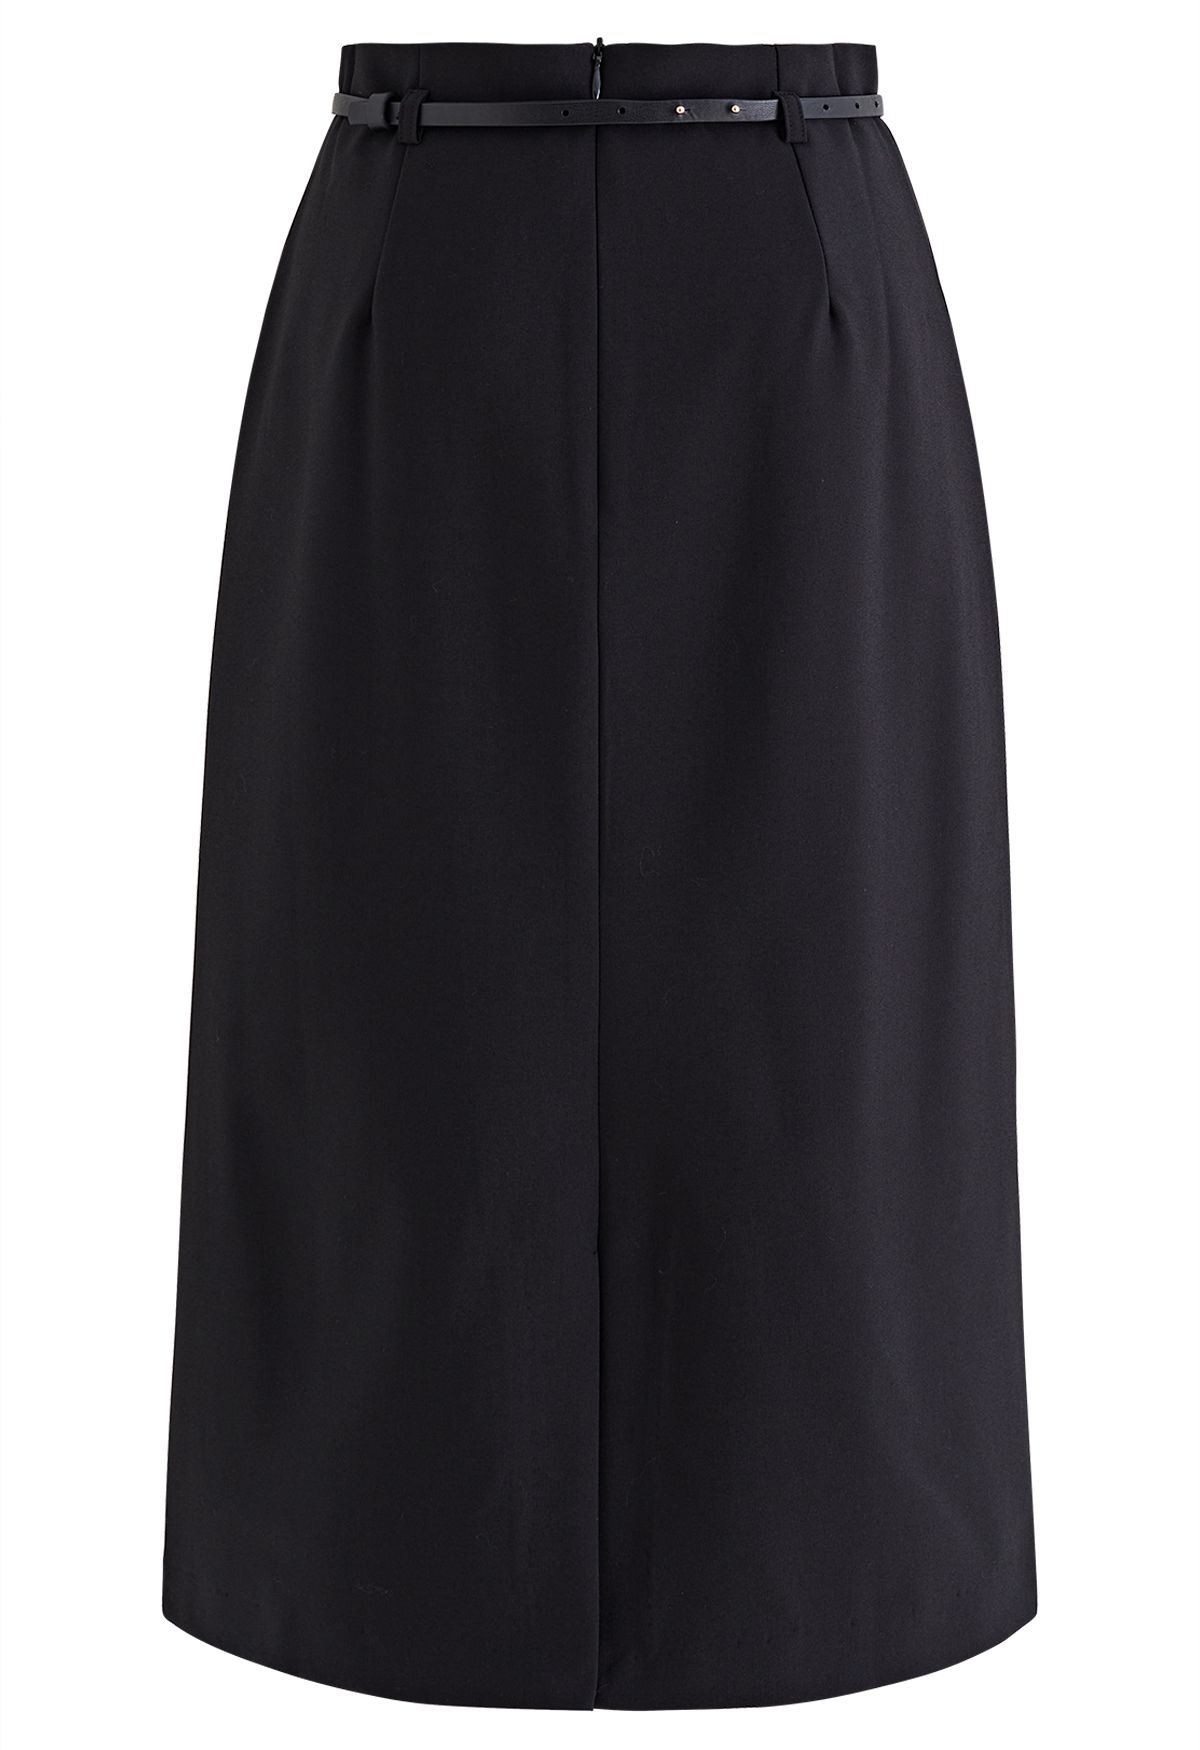 Flap Front Belted Midi Skirt in Black - Retro, Indie and Unique Fashion